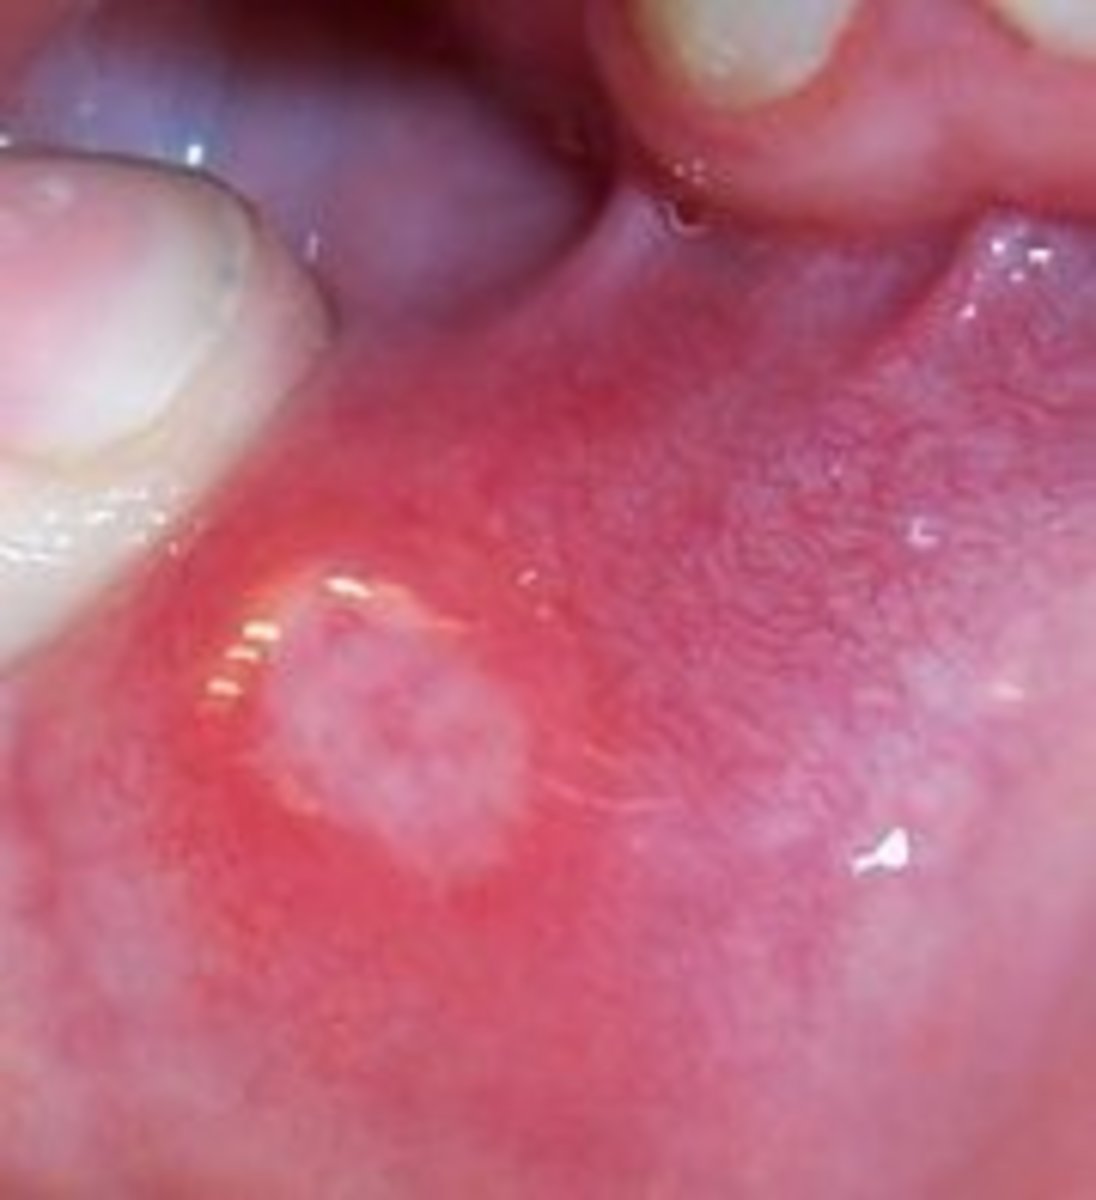 treatment-and-prevention-of-mouth-ulcers